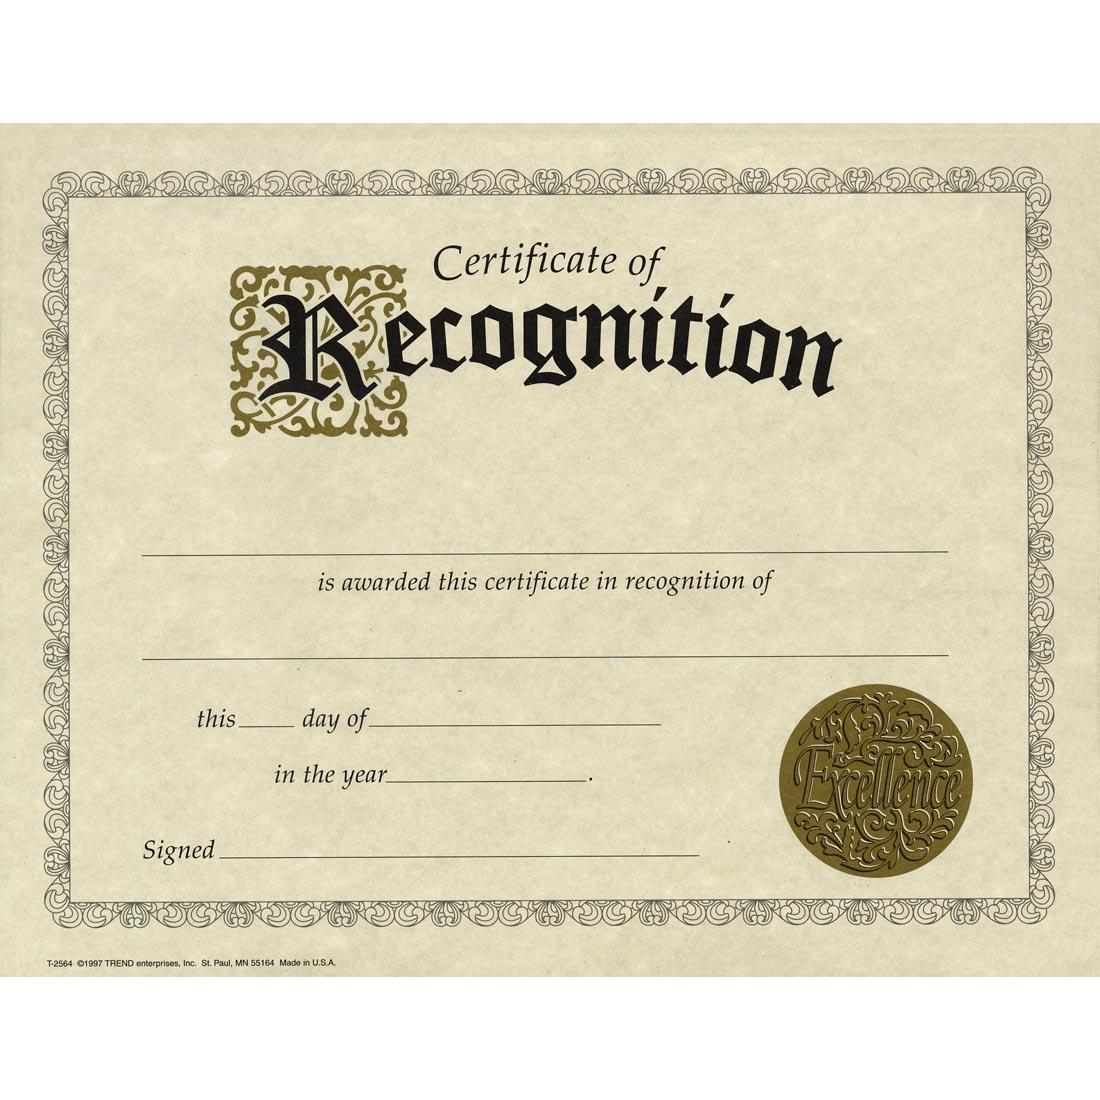 TREND Certificate of Recognition